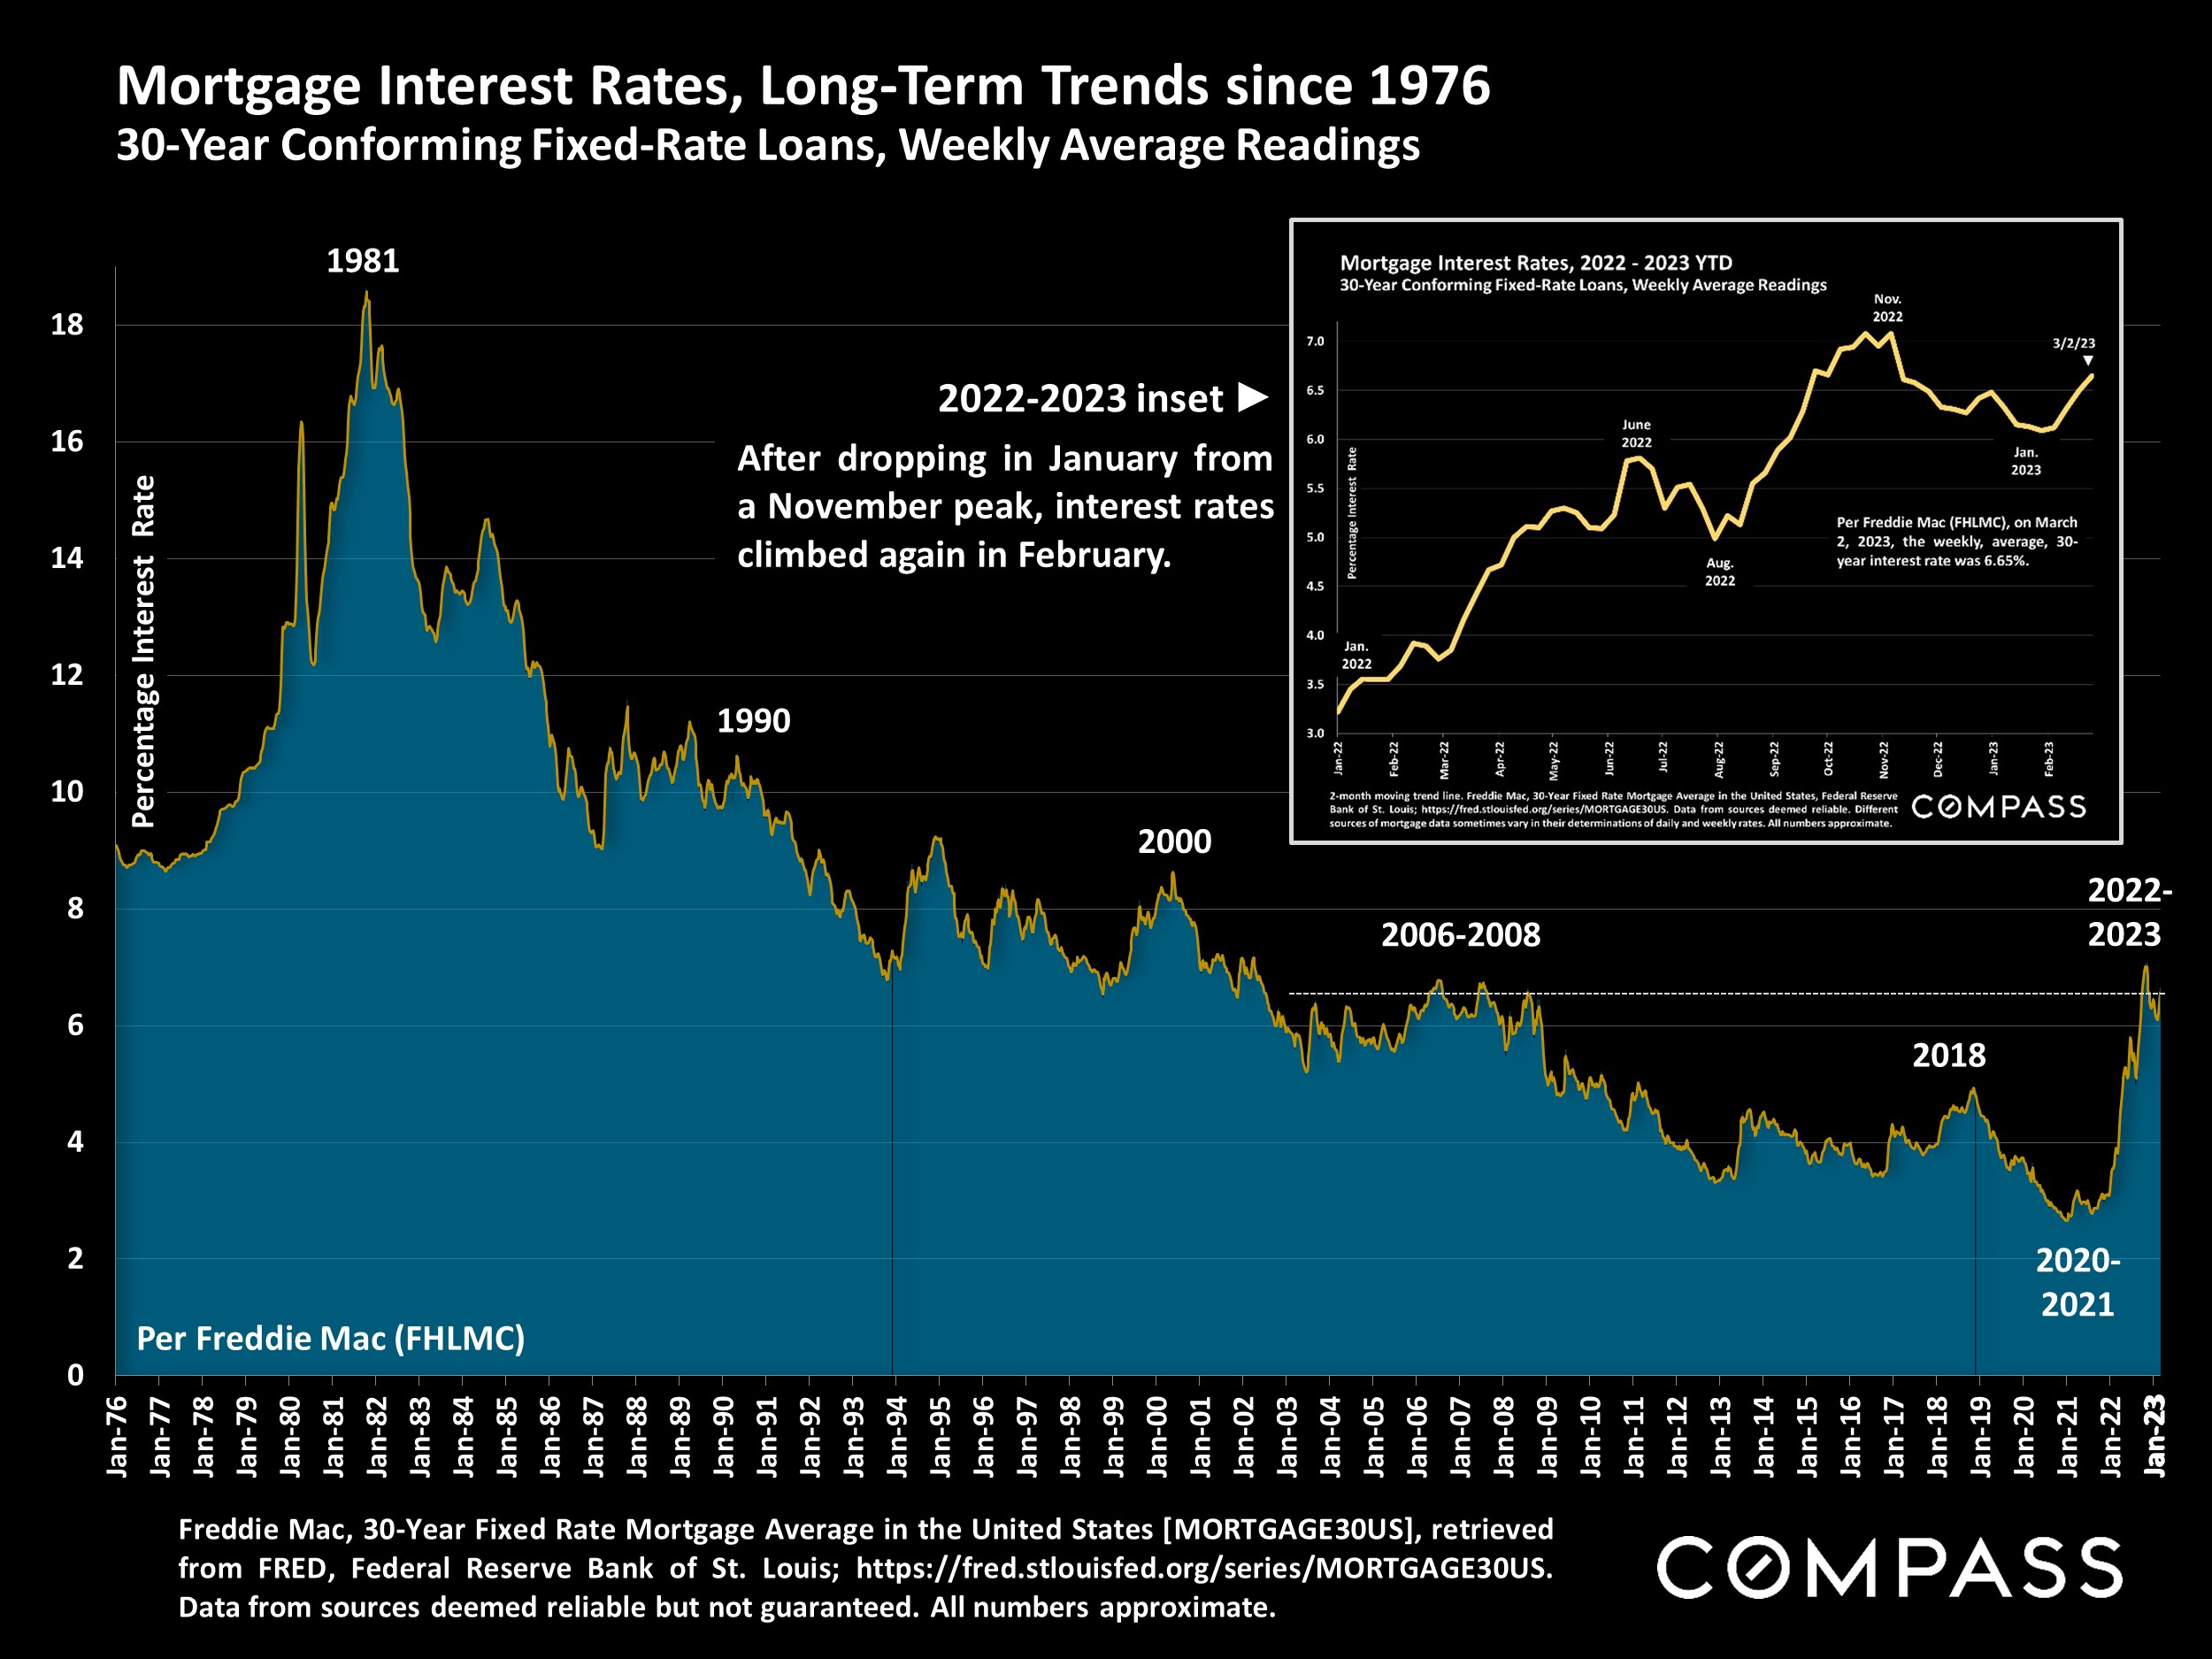 Mortgage Interest Rates, Long-Term Trends since 1976